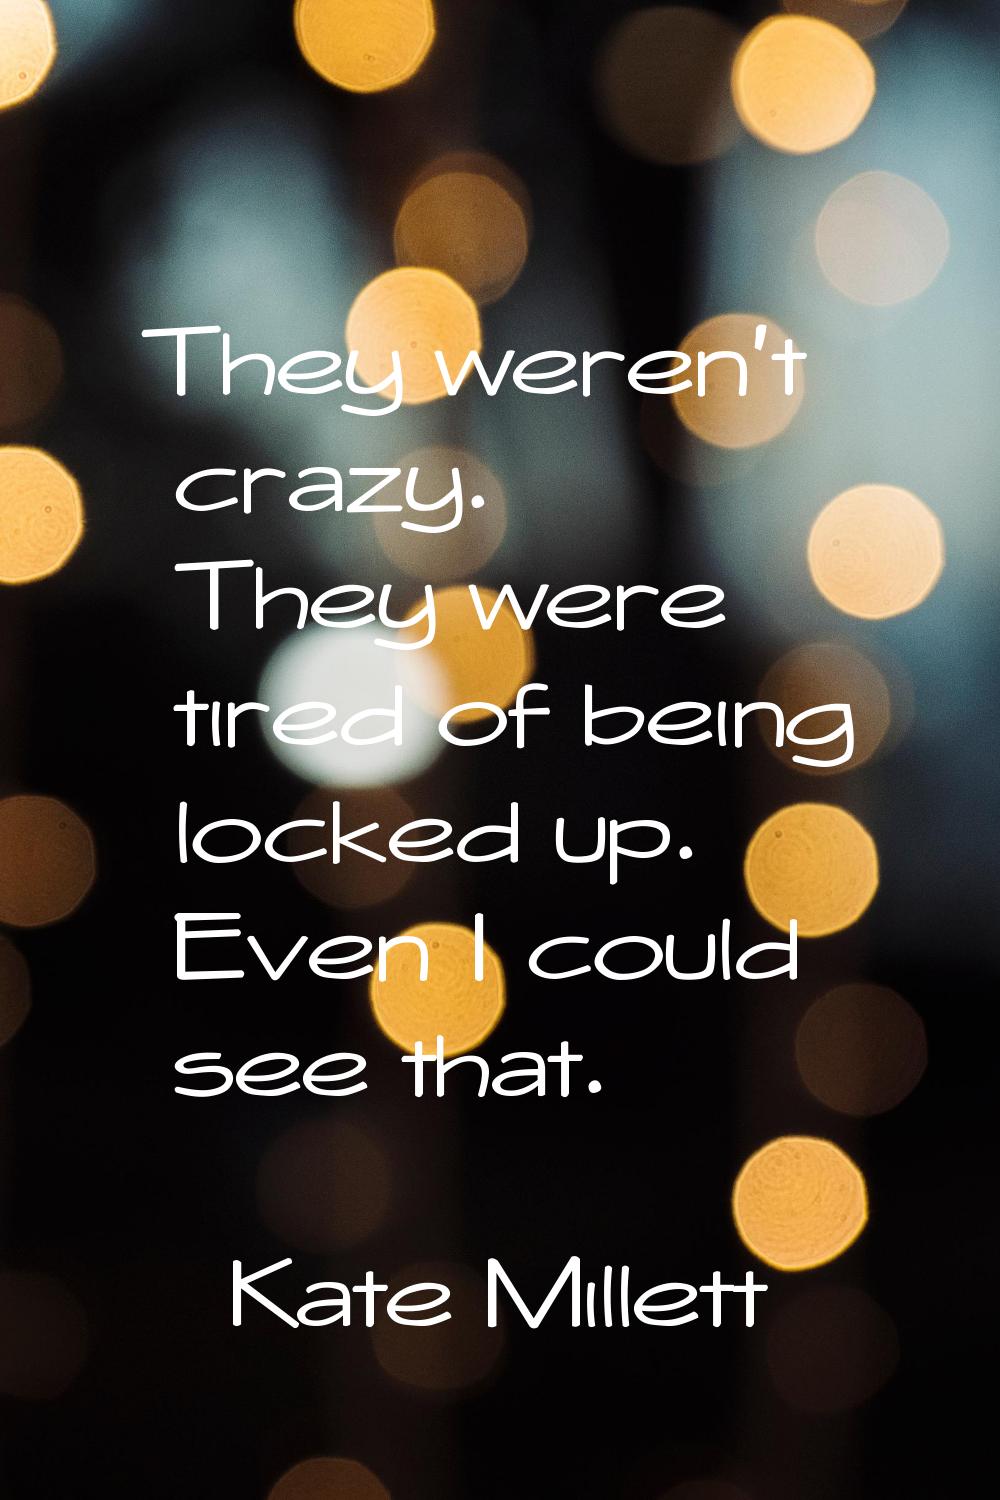 They weren't crazy. They were tired of being locked up. Even I could see that.